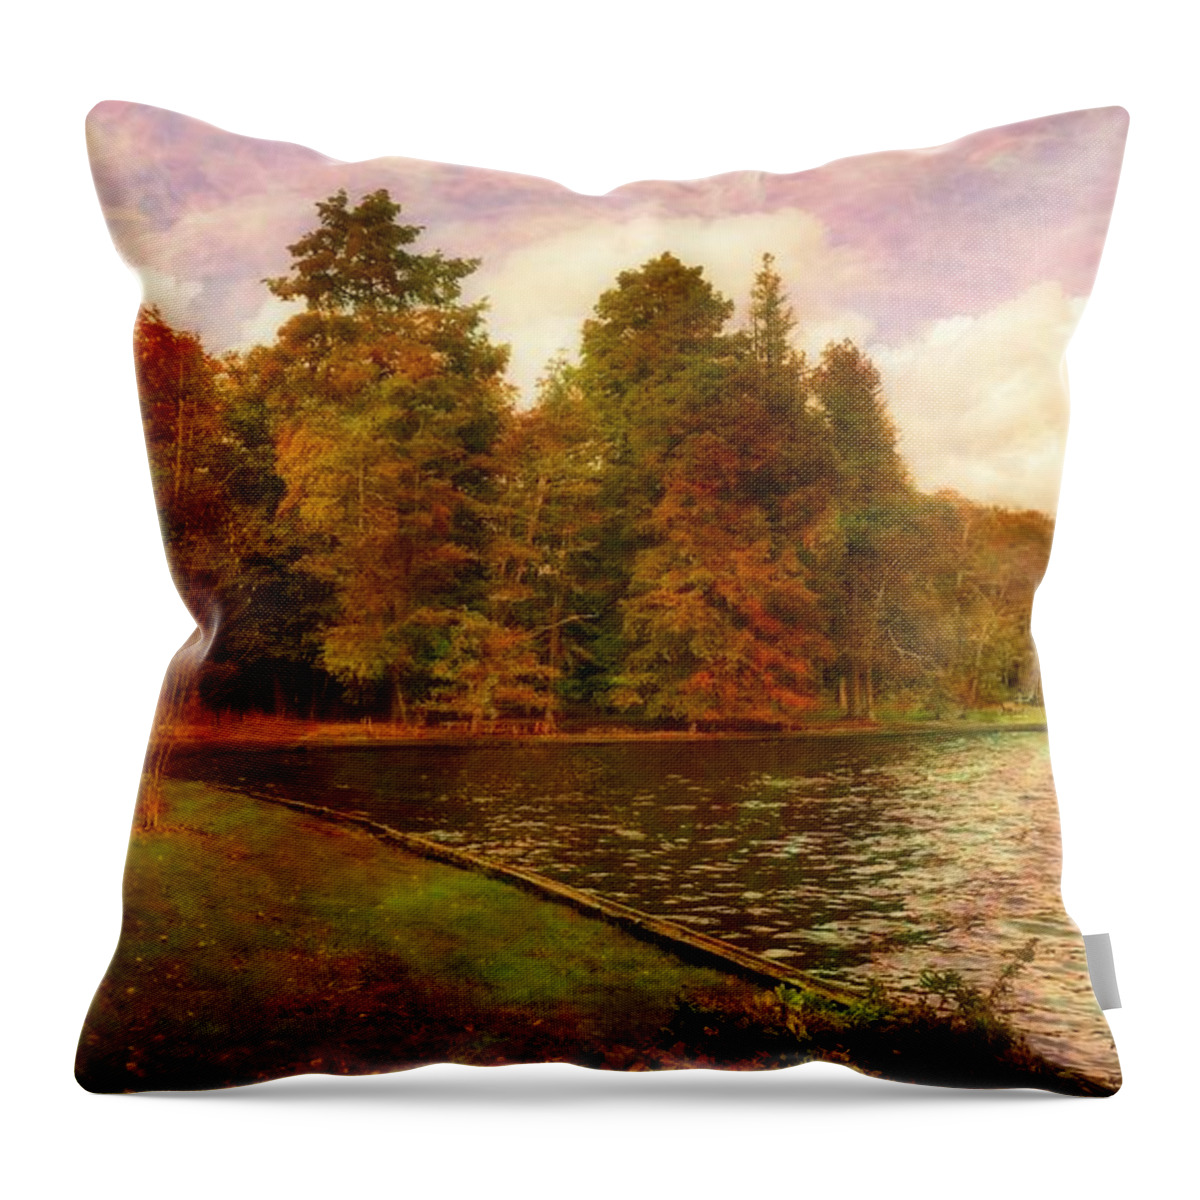 Nature Throw Pillow featuring the photograph Walking The Forest Trail by the lake by Stacie Siemsen